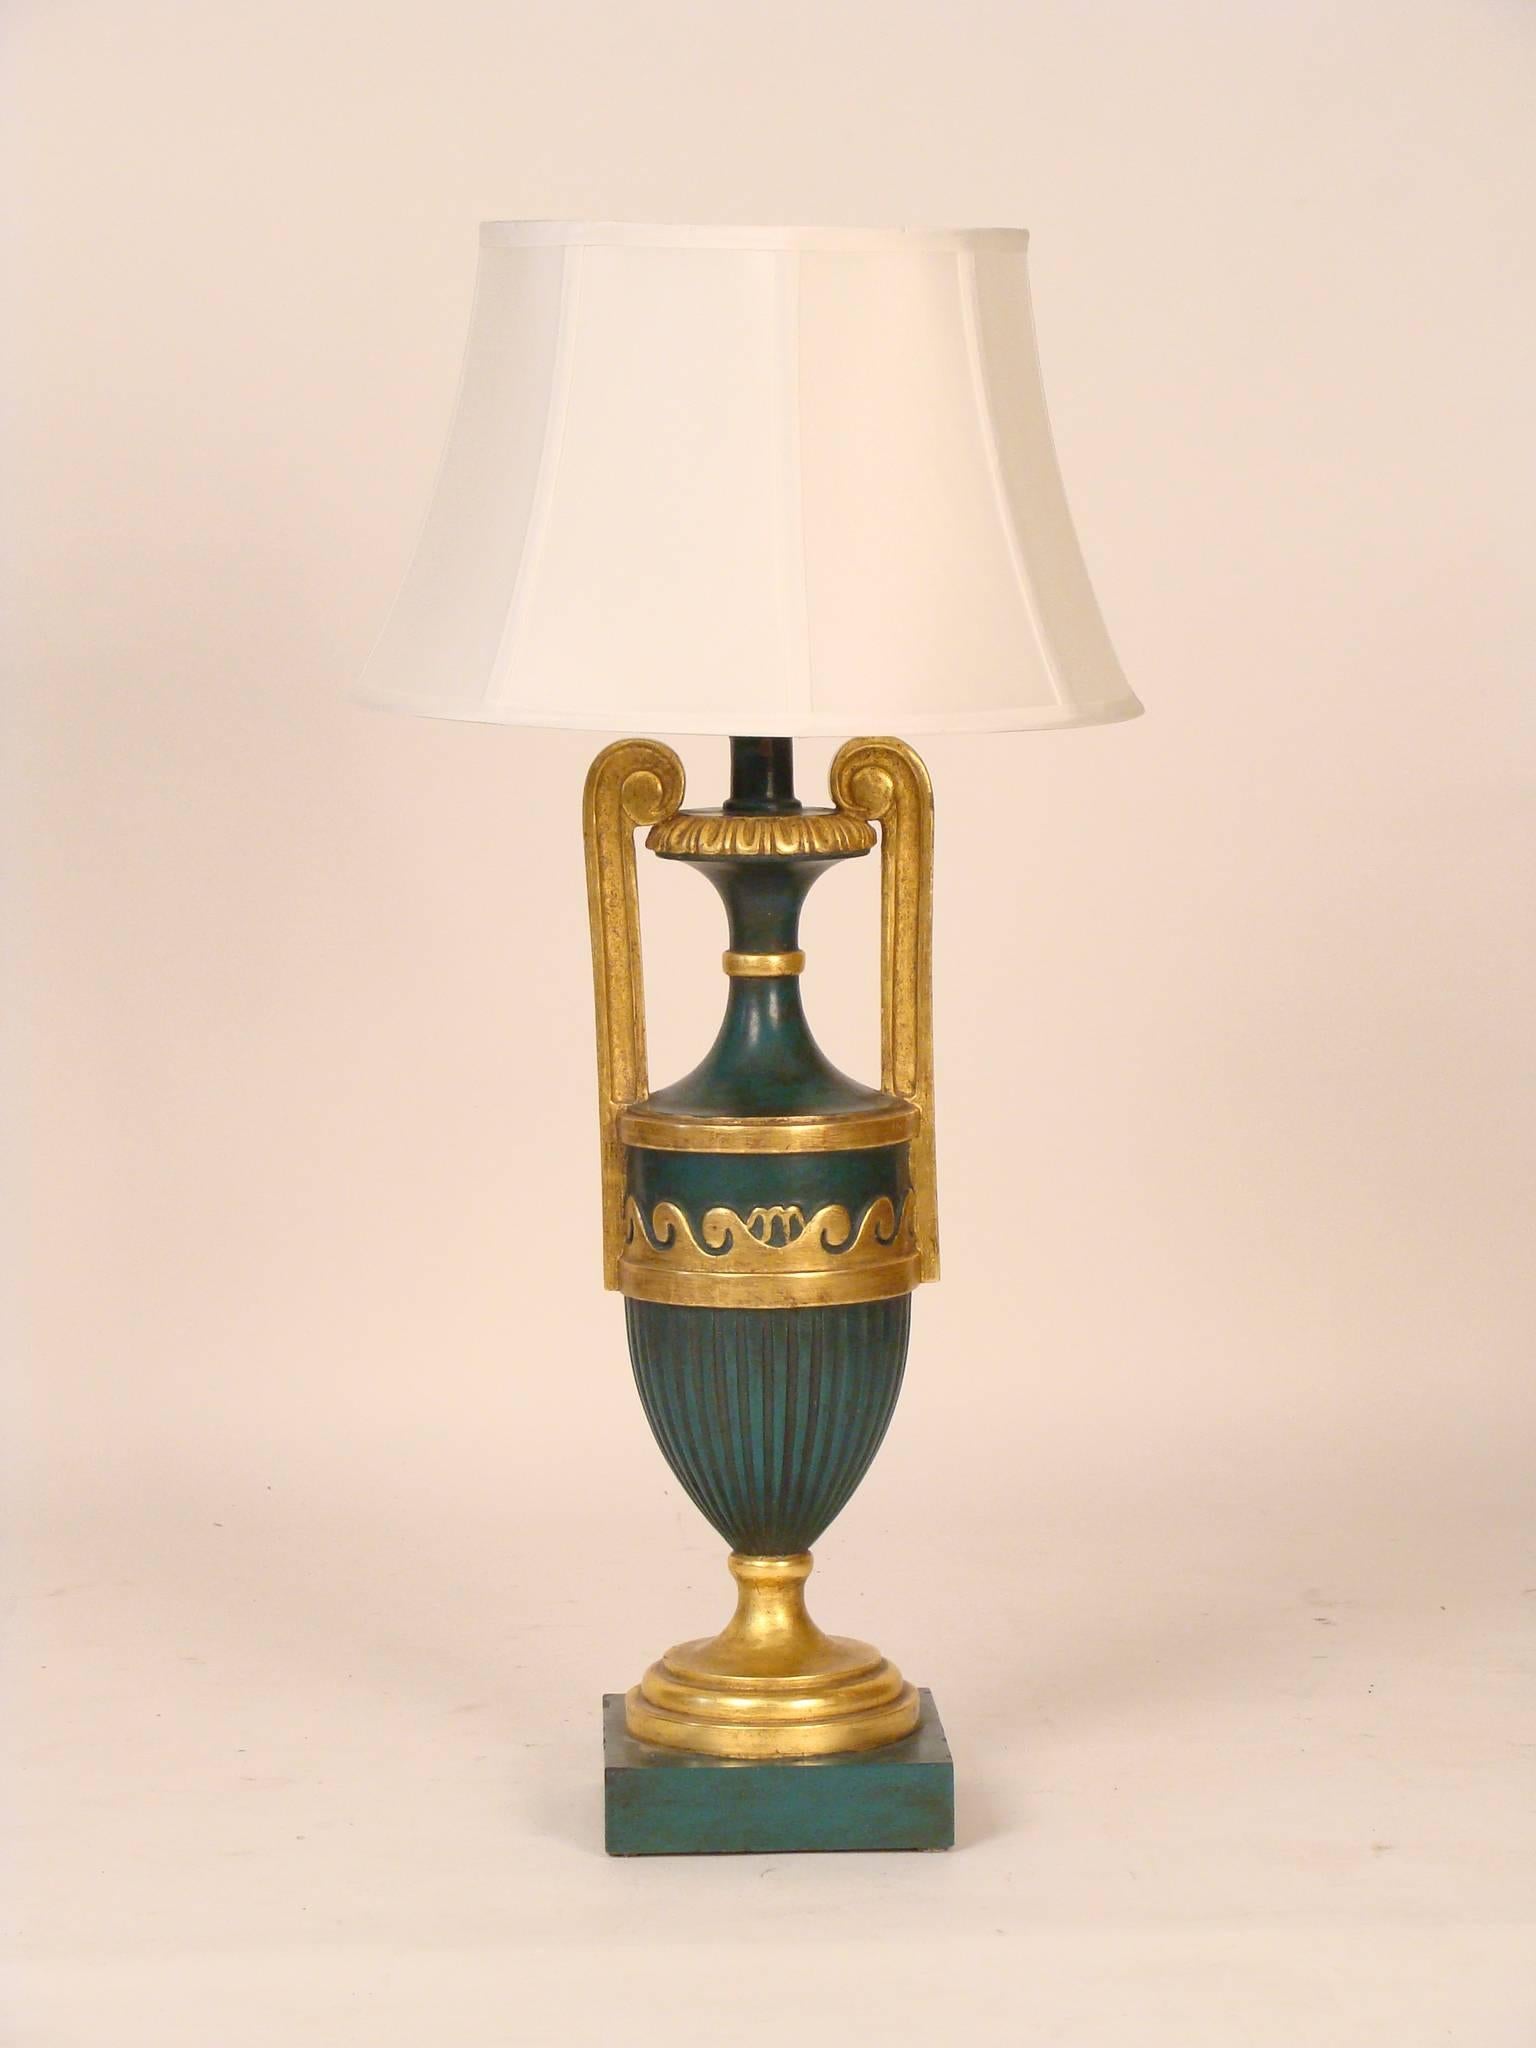 Pair of neoclassical style partial-gilt and painted lamps, circa 1990. Height to top of shades 31